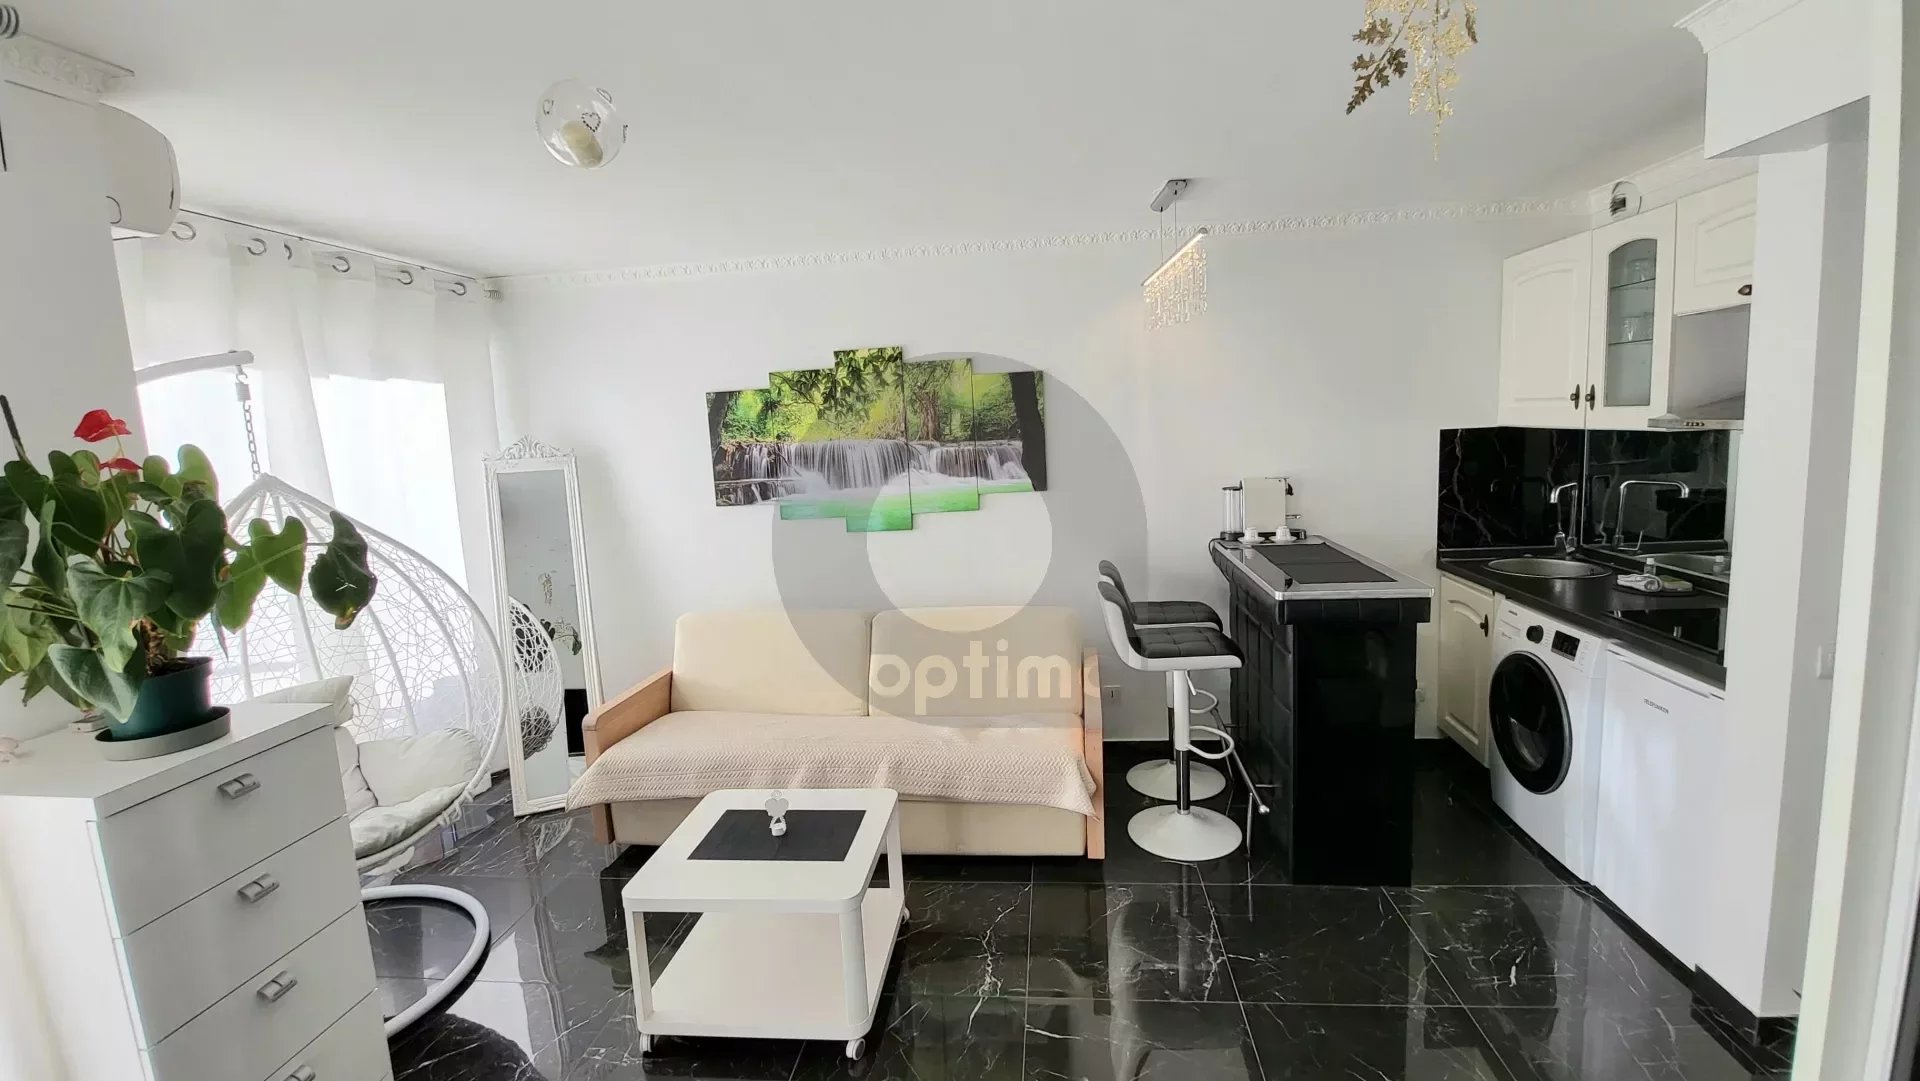 City center - studio - terrace - sunny and quiet - fully renovated